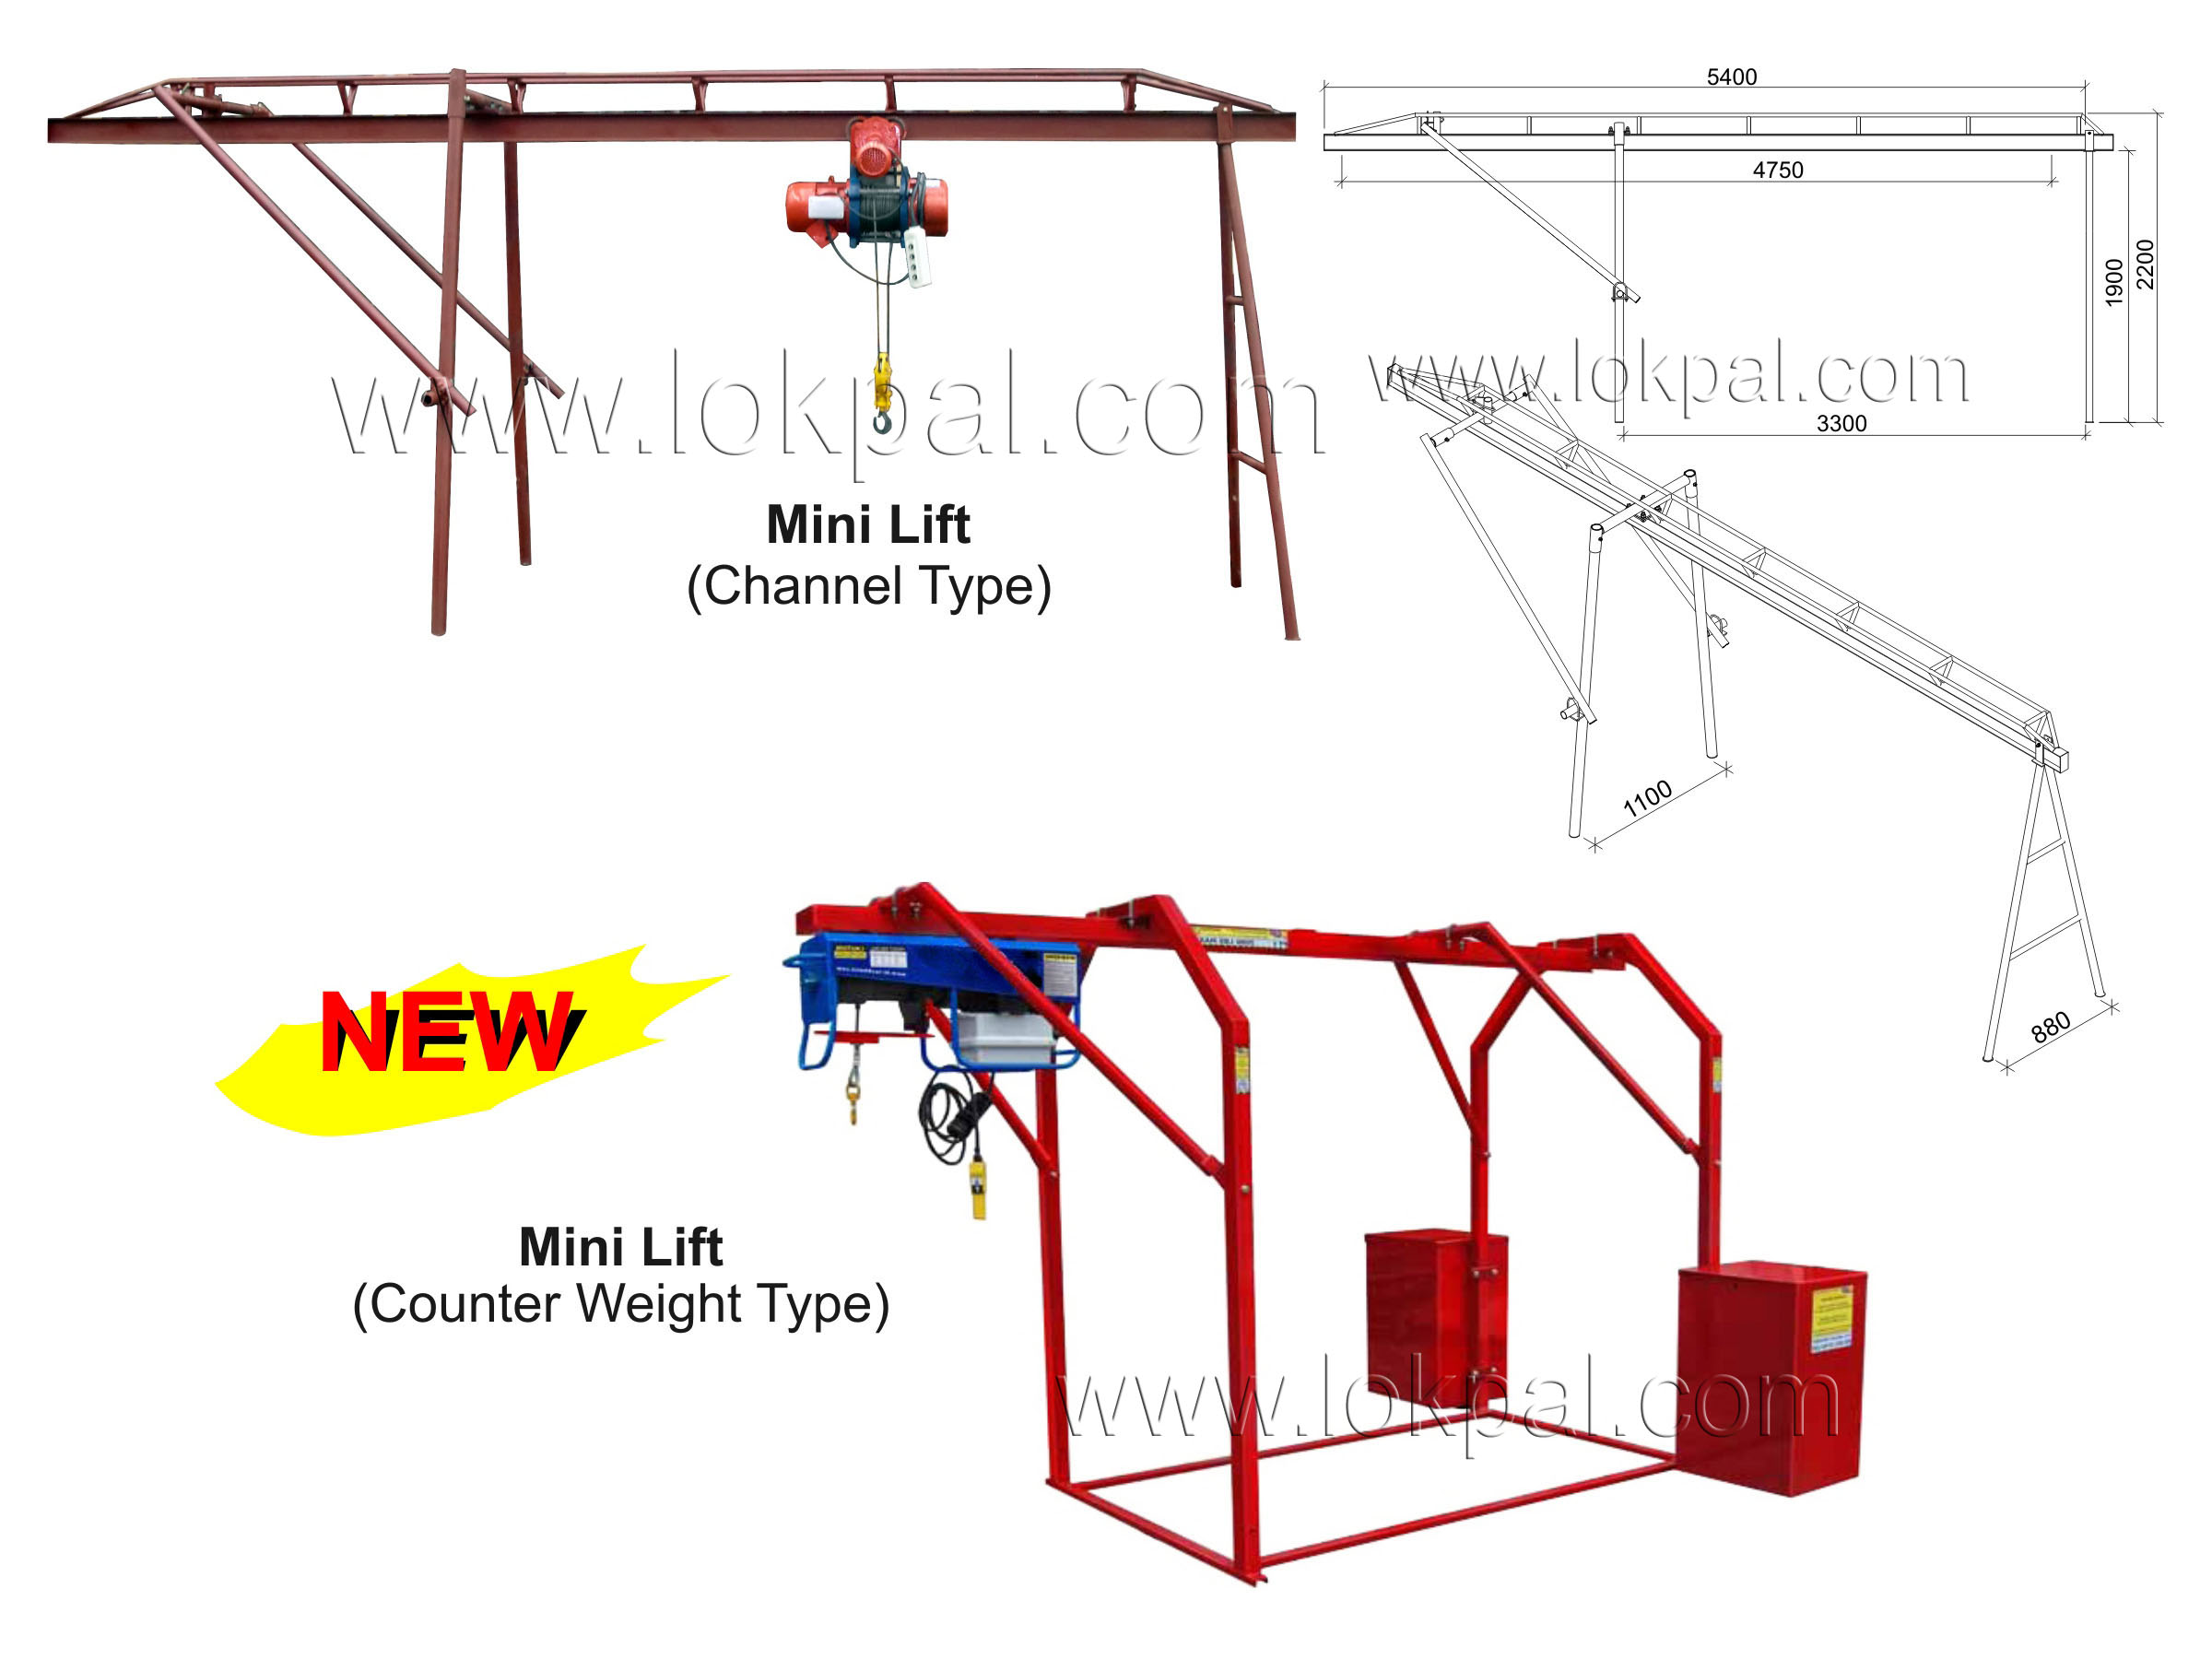 Lifts, Building Lifts Manufacturer, Lifts Wholesalers, Lift Suppliers, Delhi NCR, Noida, India